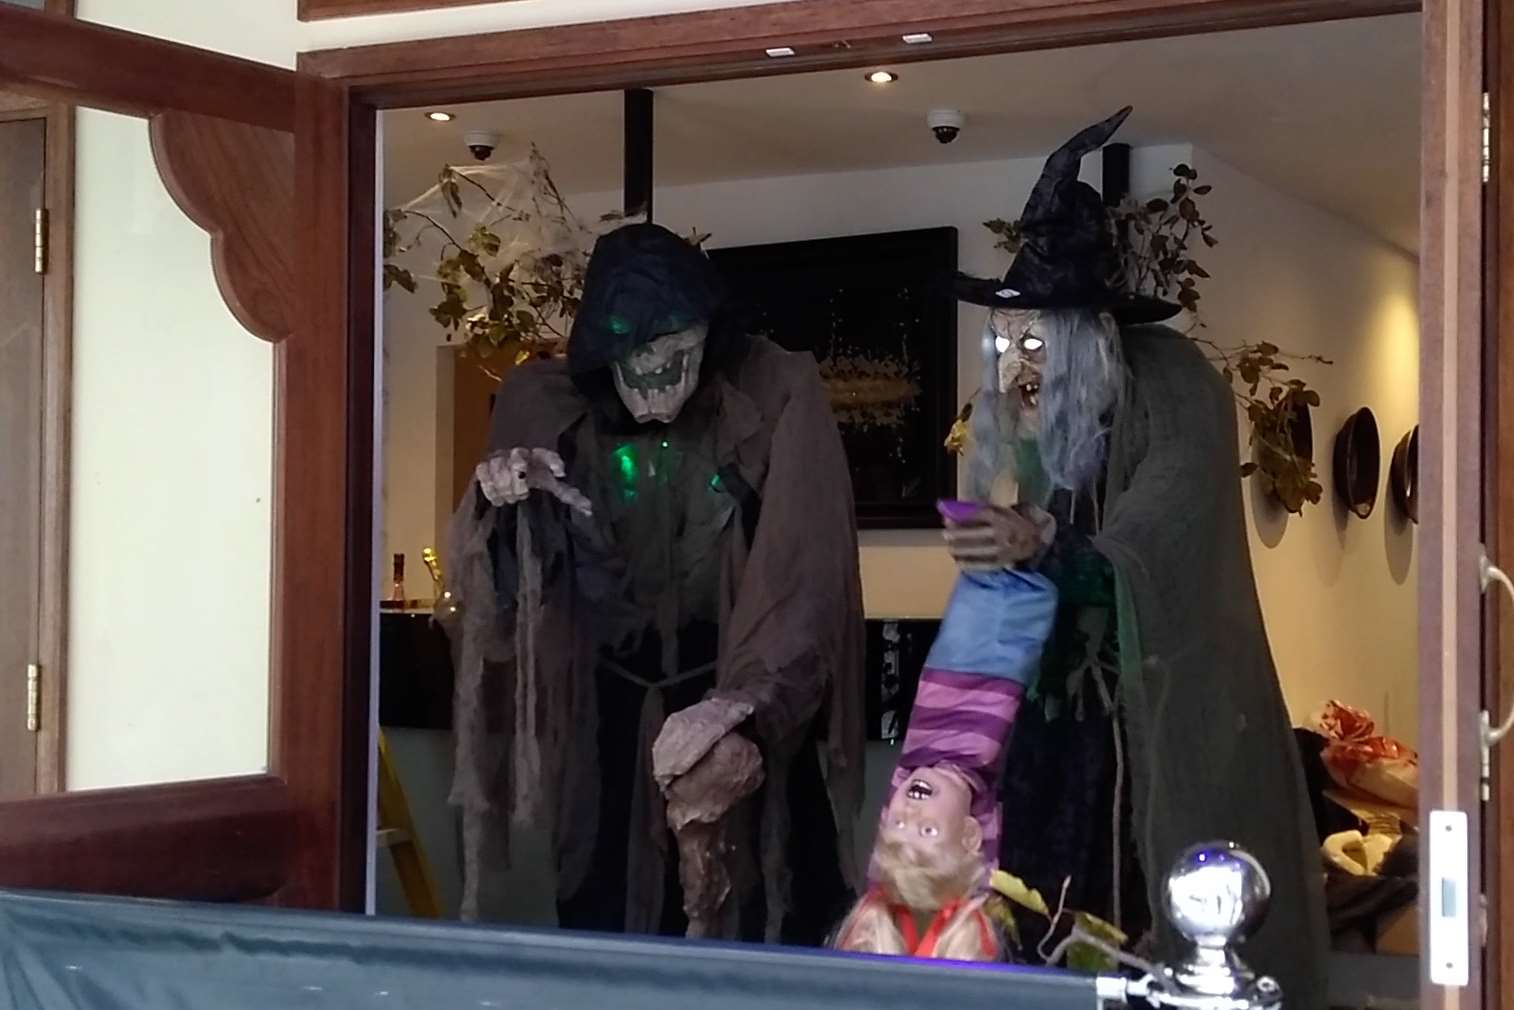 A ghoulish figure and witch have been placed outside the nightclub